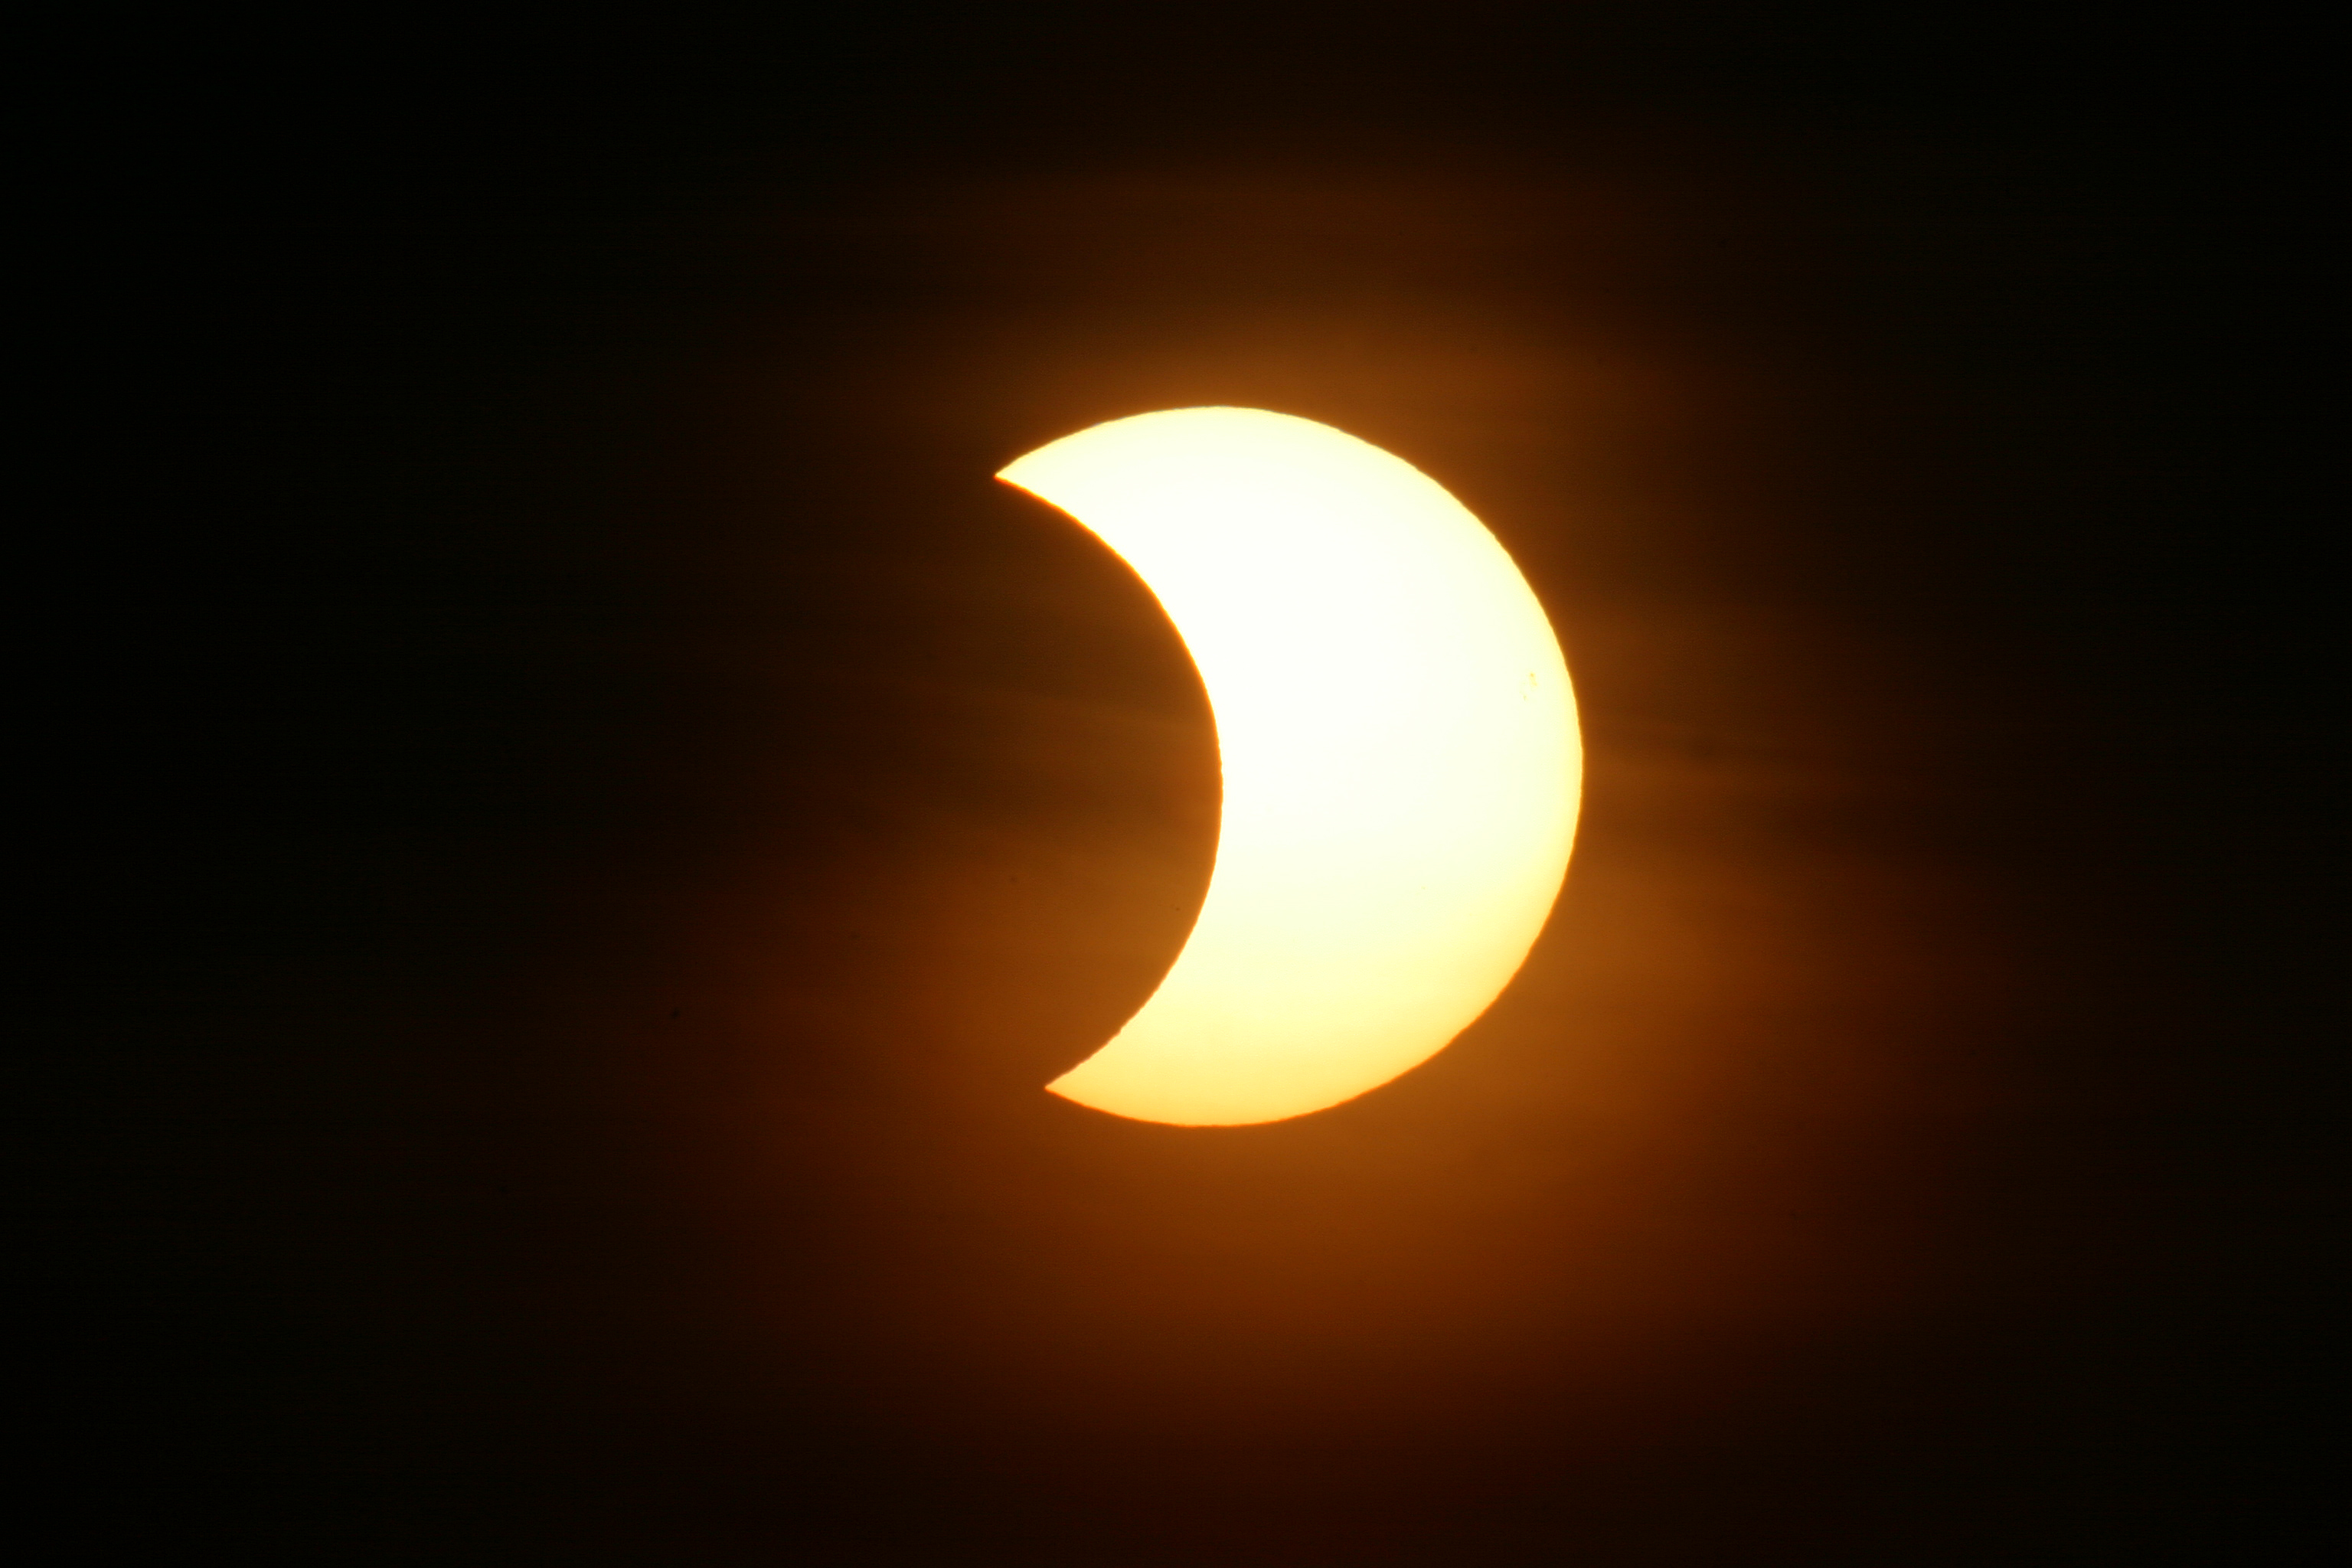 Partial Solar Eclipse as seen on May 31, 2003.